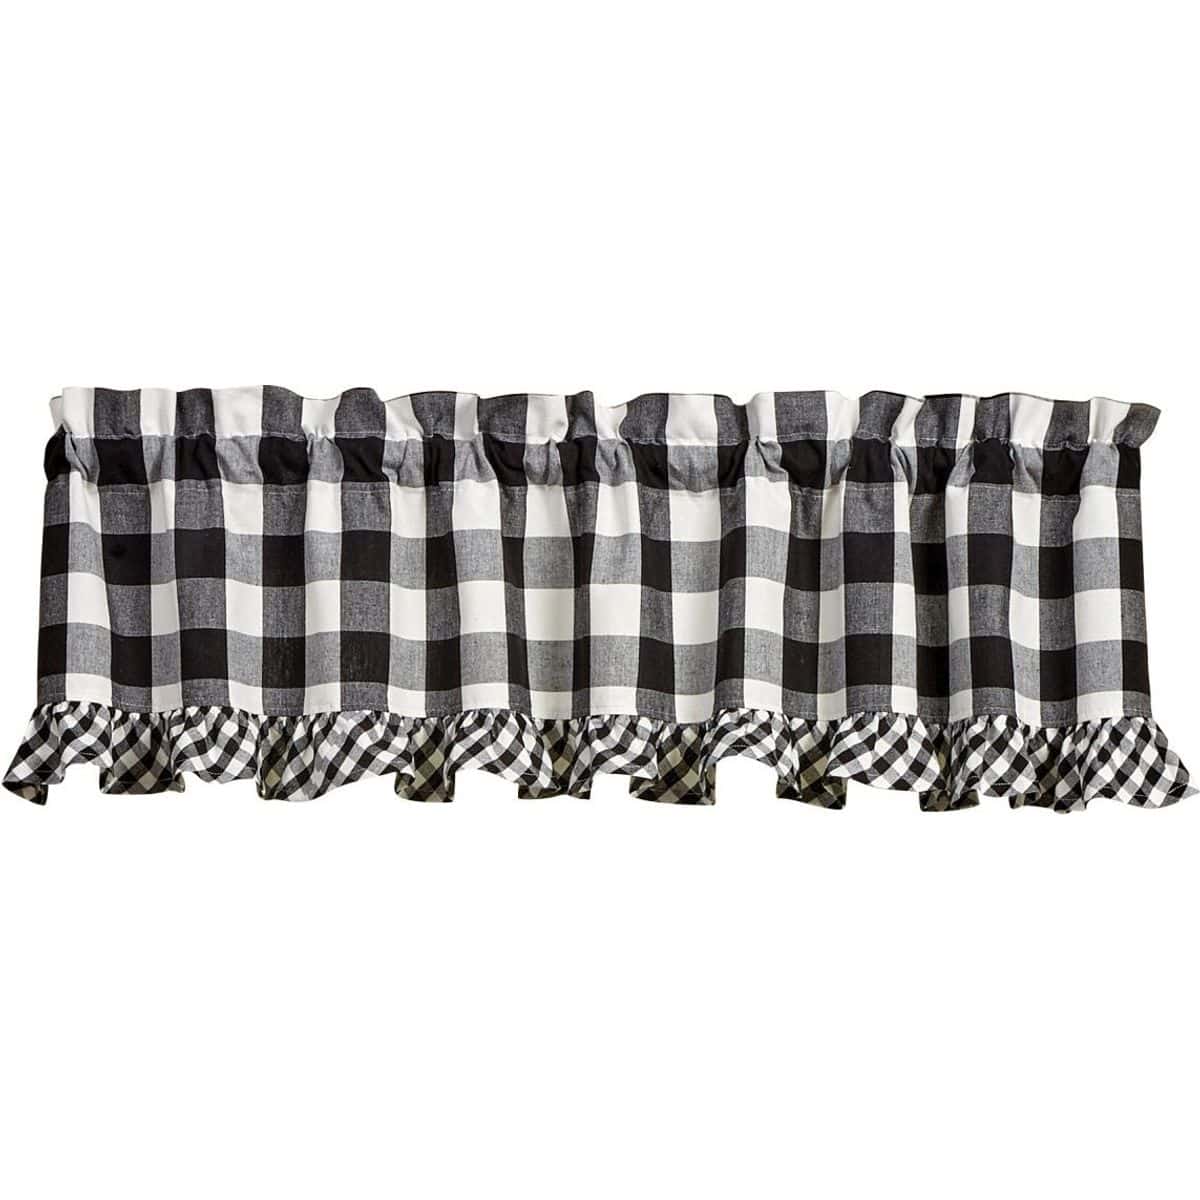 Wicklow Check in Black & Cream Ruffled Valance Unlined-Park Designs-The Village Merchant